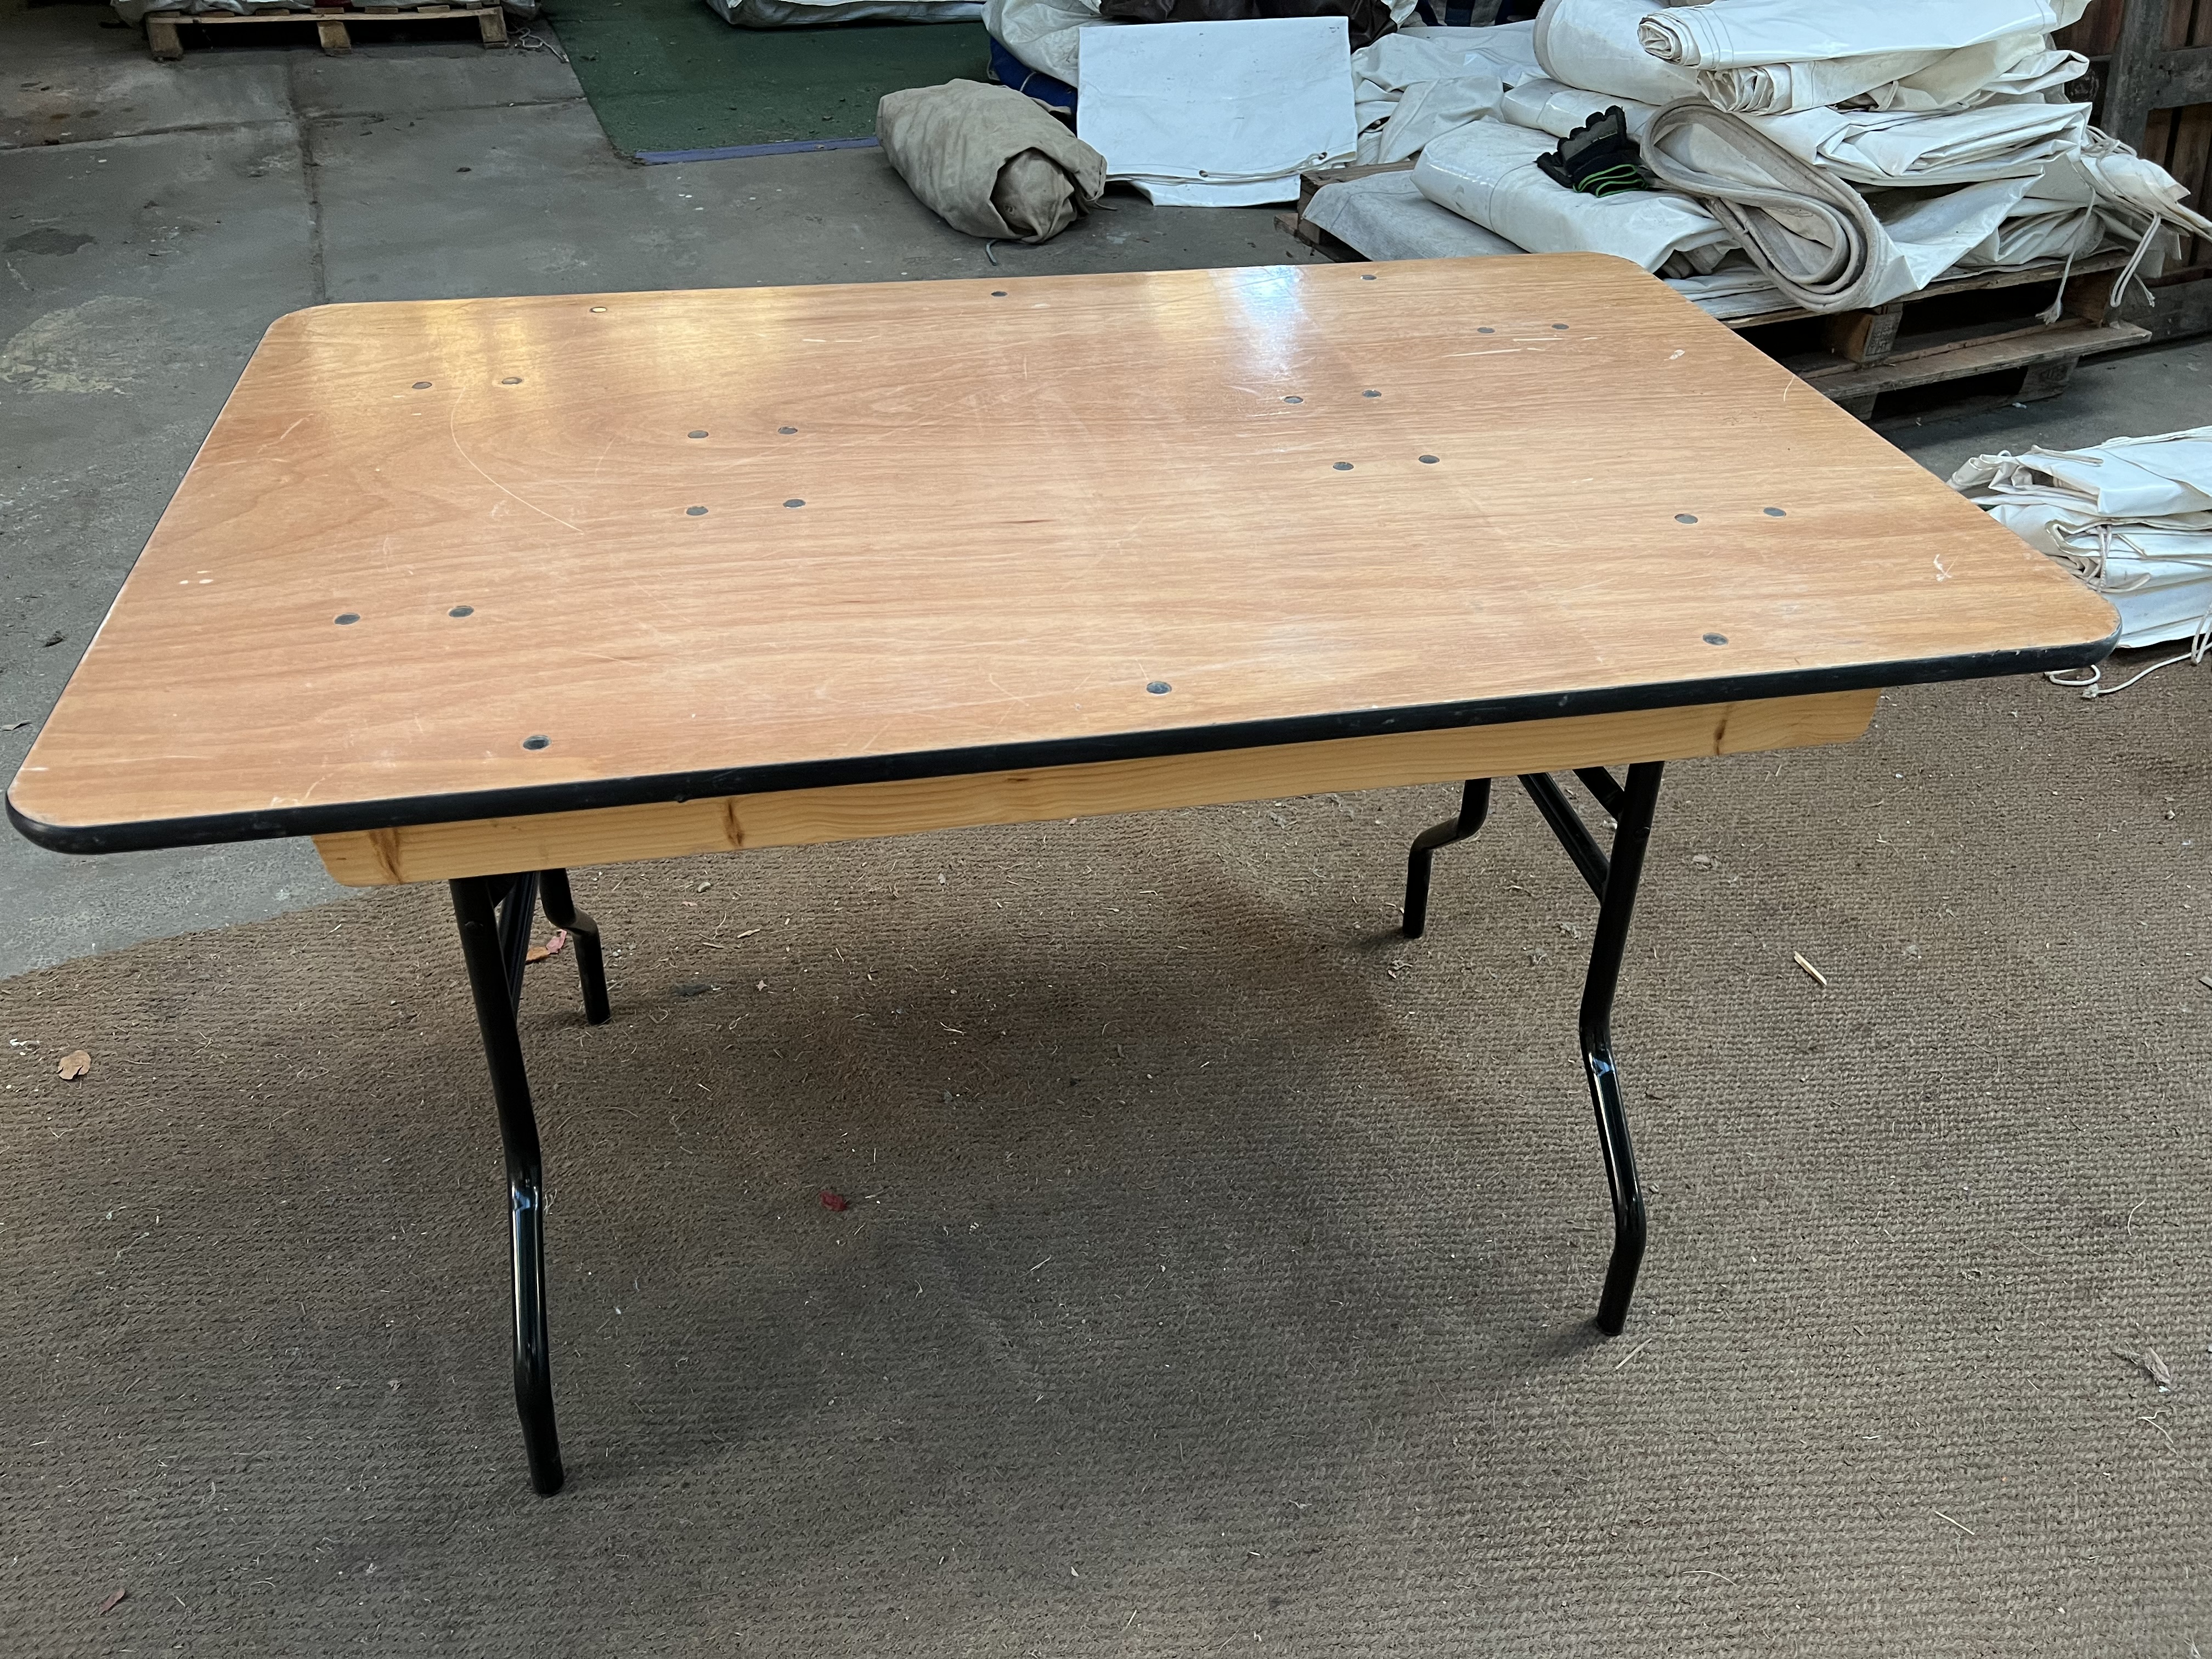 25 no 4ft x 2ft 6in trestle tables with folding legs and plywood top. This lot is subject to VAT.